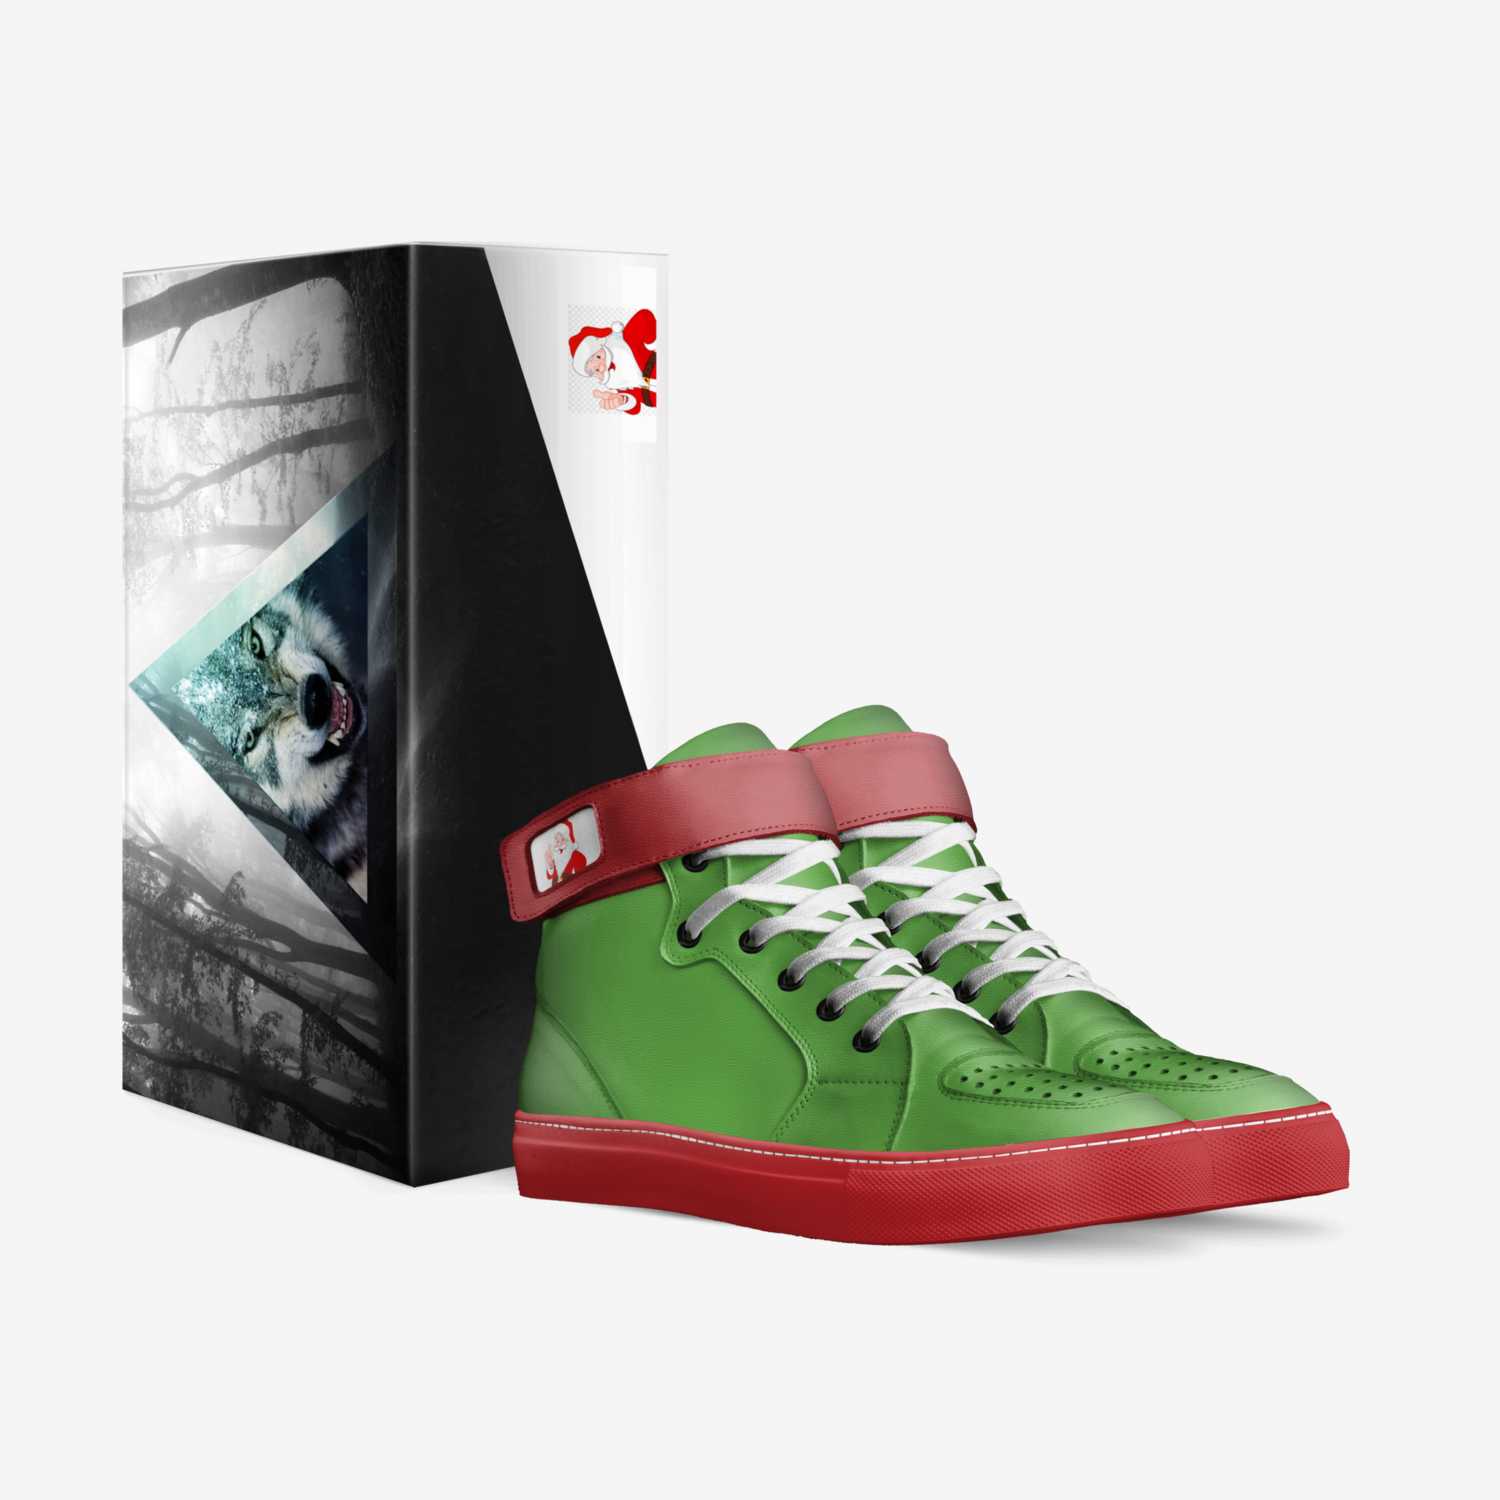 DM ‘christmas’ custom made in Italy shoes by Derek | Box view